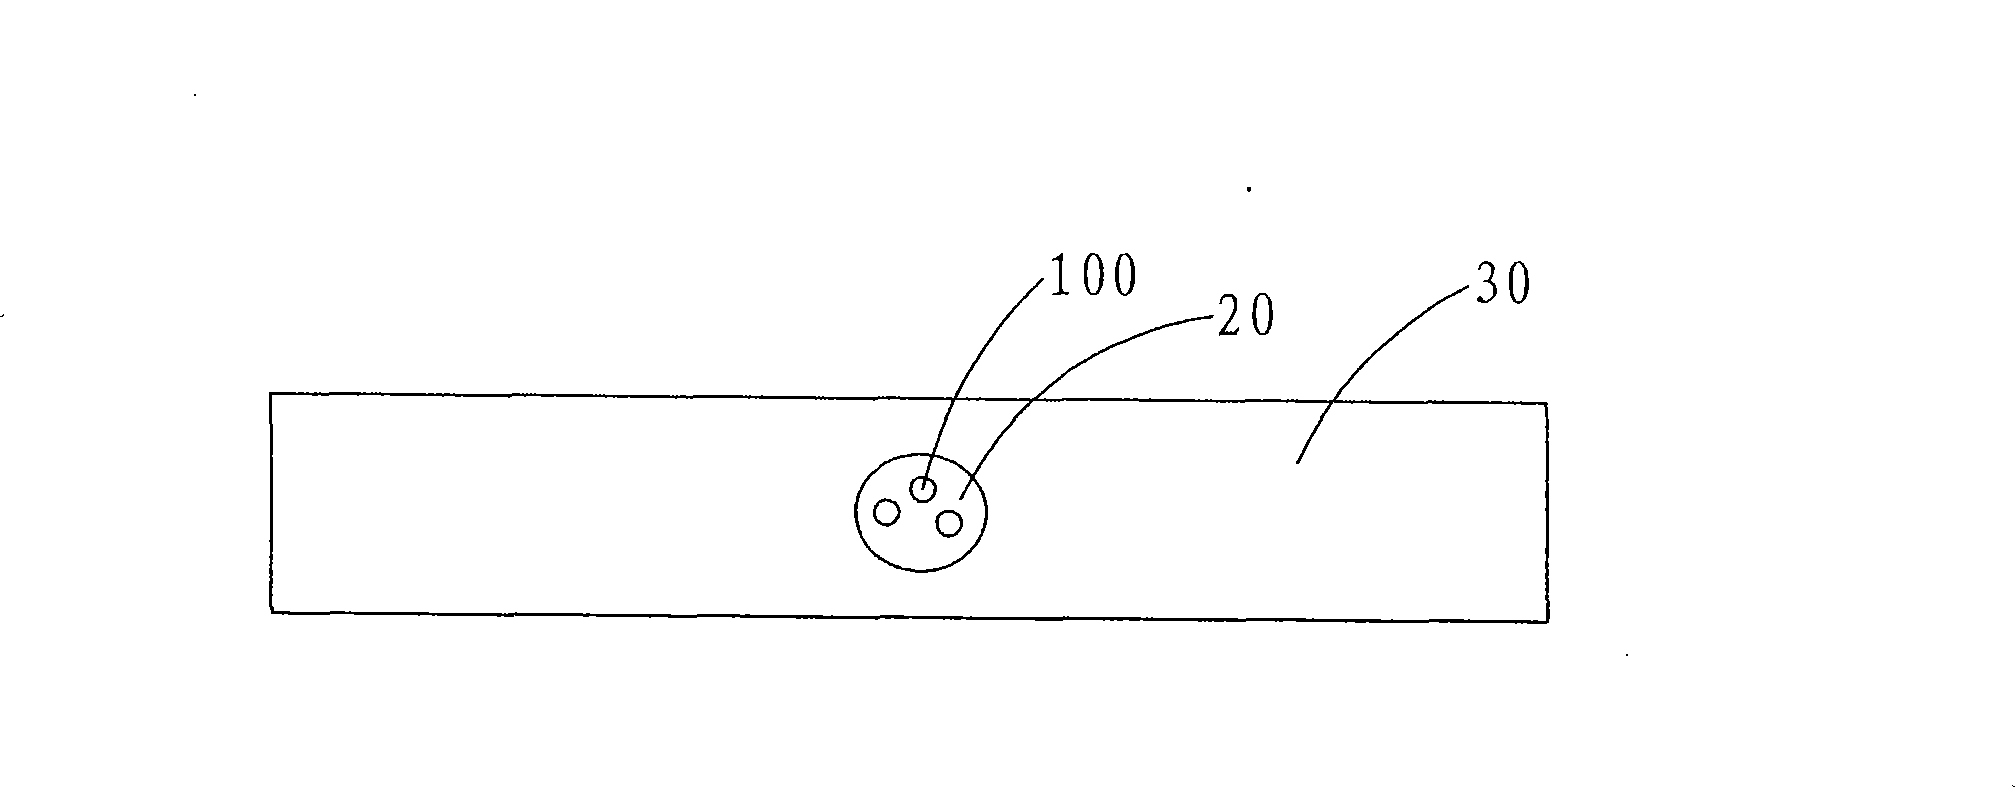 Nozzle system capable of continuously evening chemical vapour deposition of large area